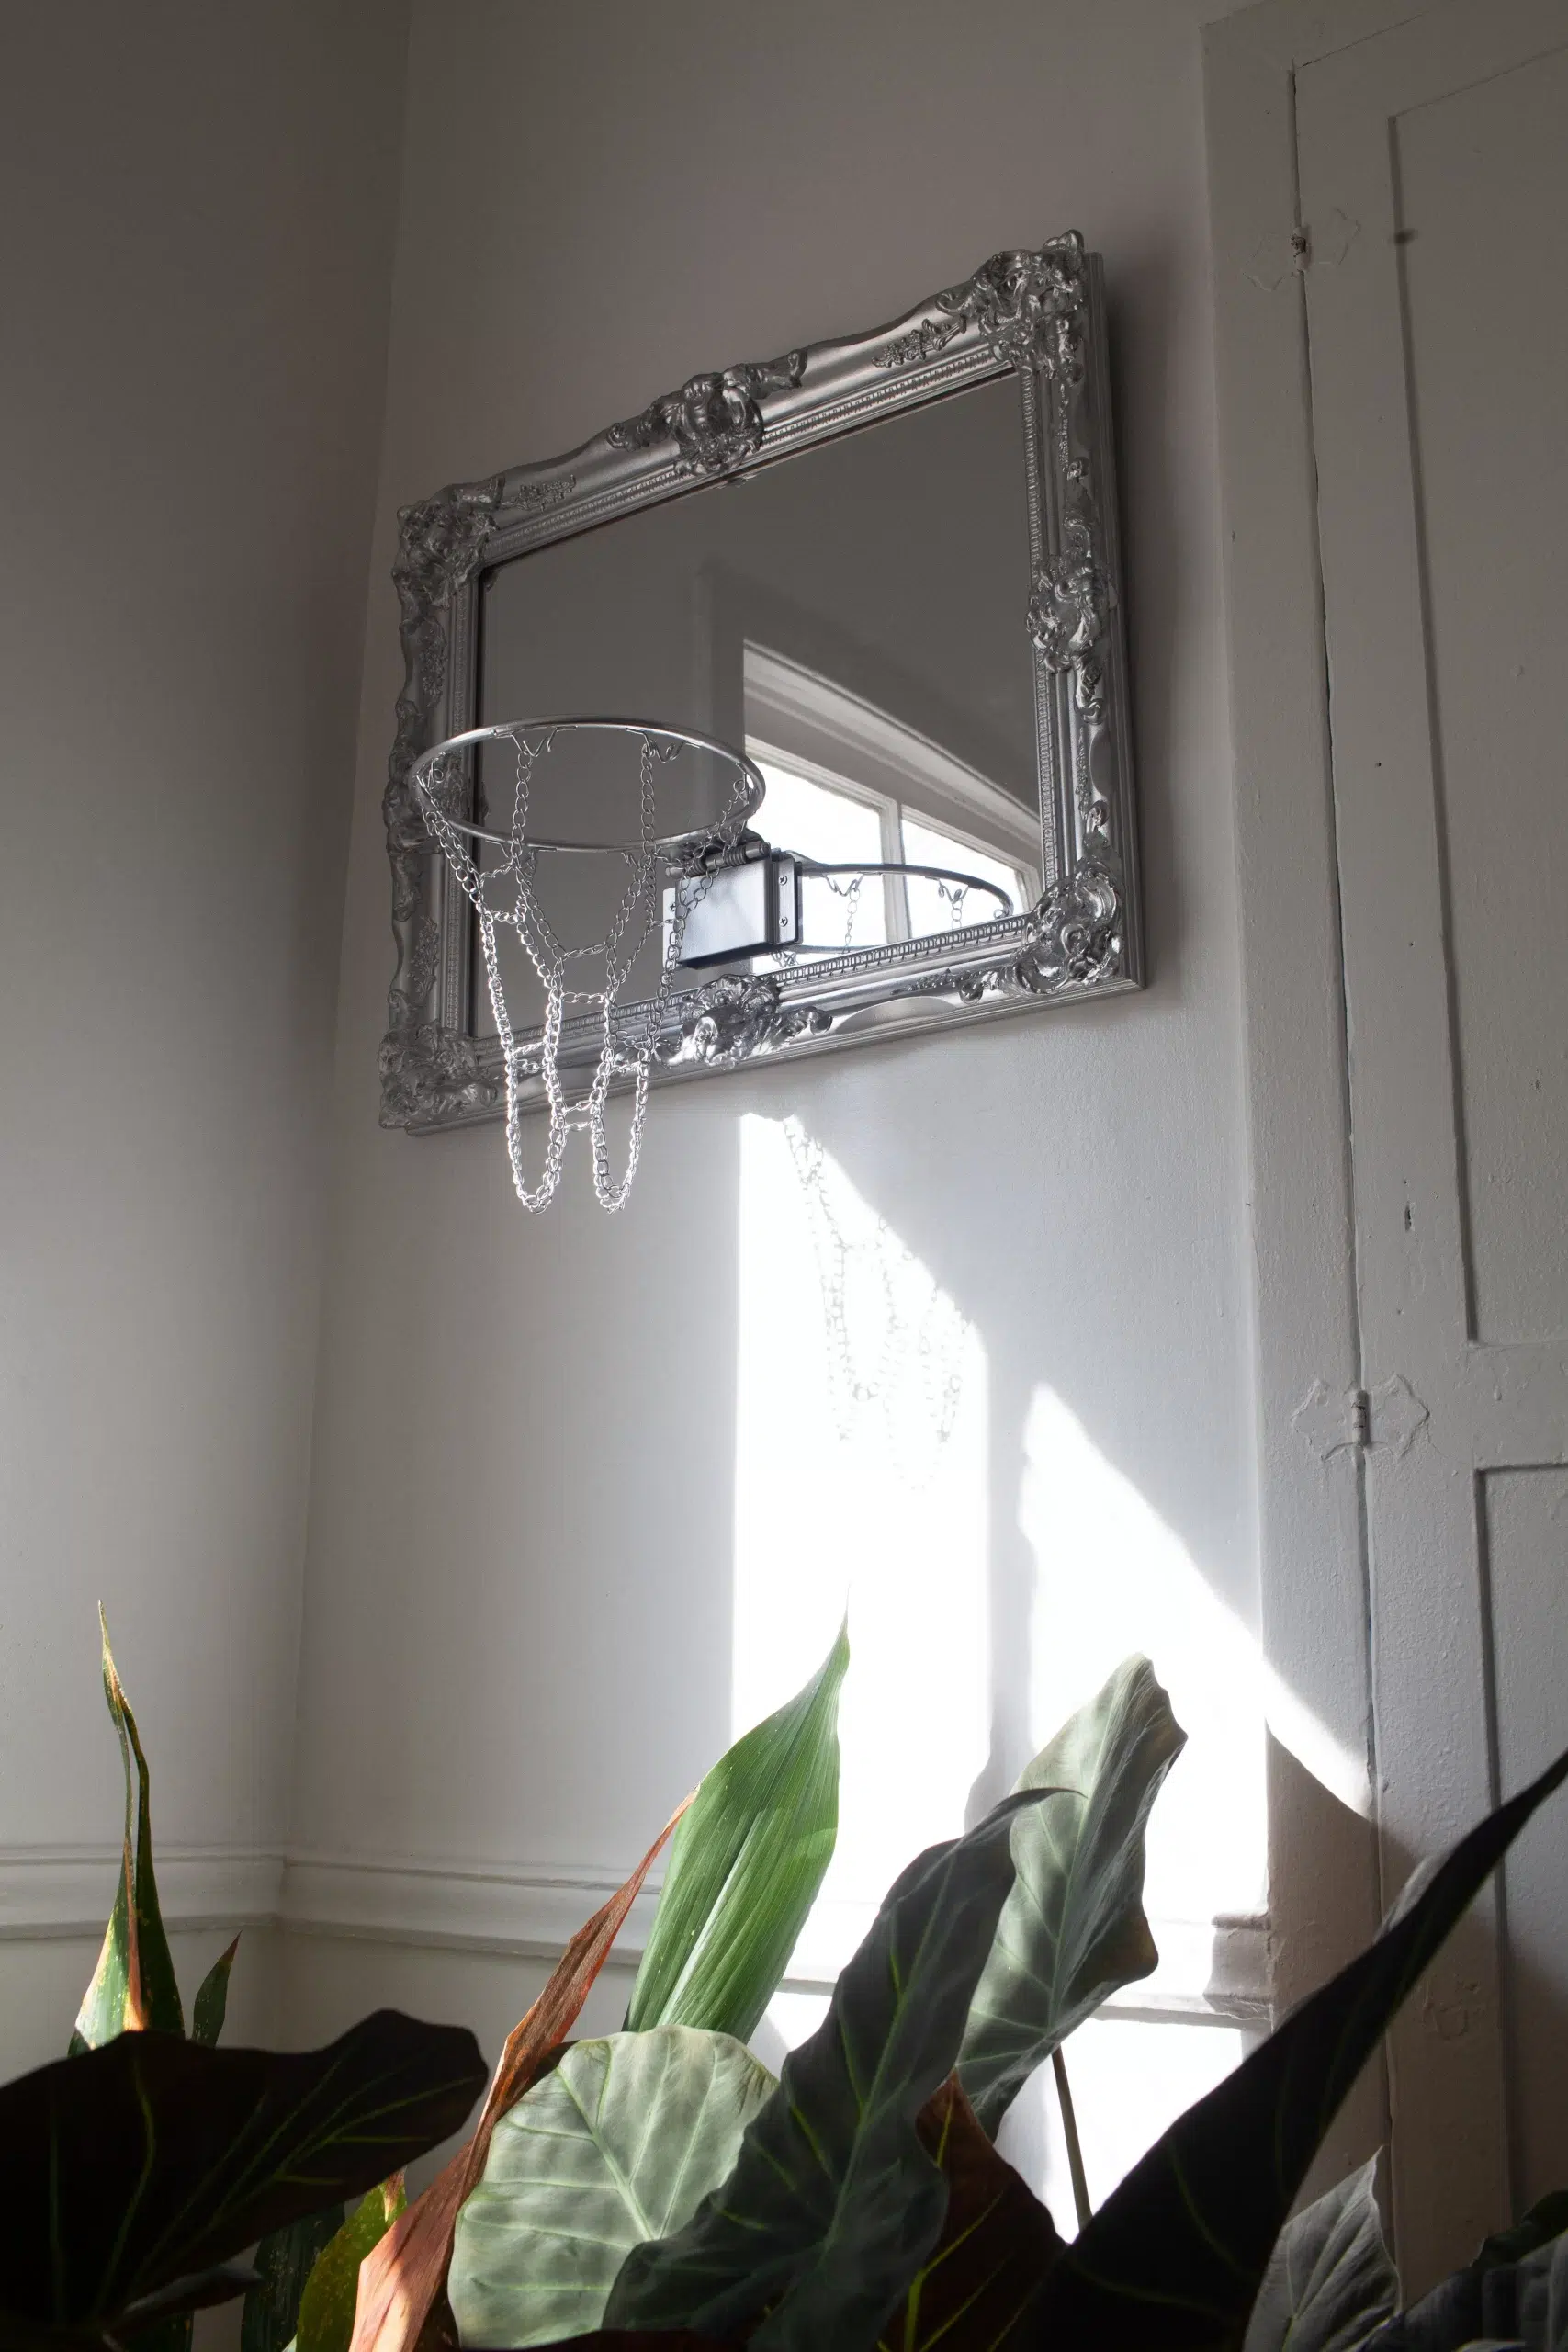 A mirror adorned with a hanging Mirror Hoop.